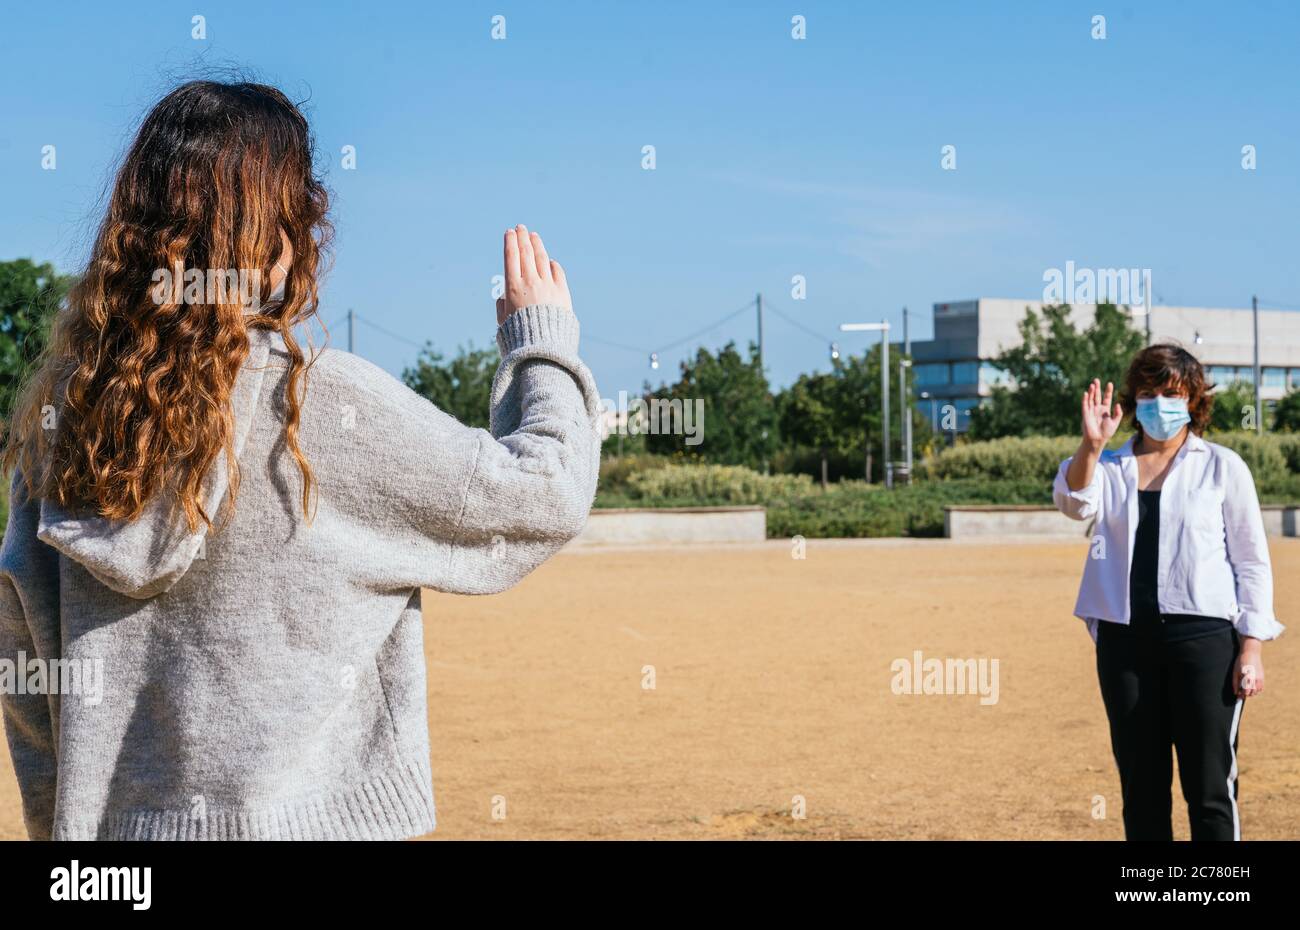 Social distance. Two neighbors walk through a park and greet each other while keeping their distance from the pandemic. Pandemic. Coronation virus dev Stock Photo